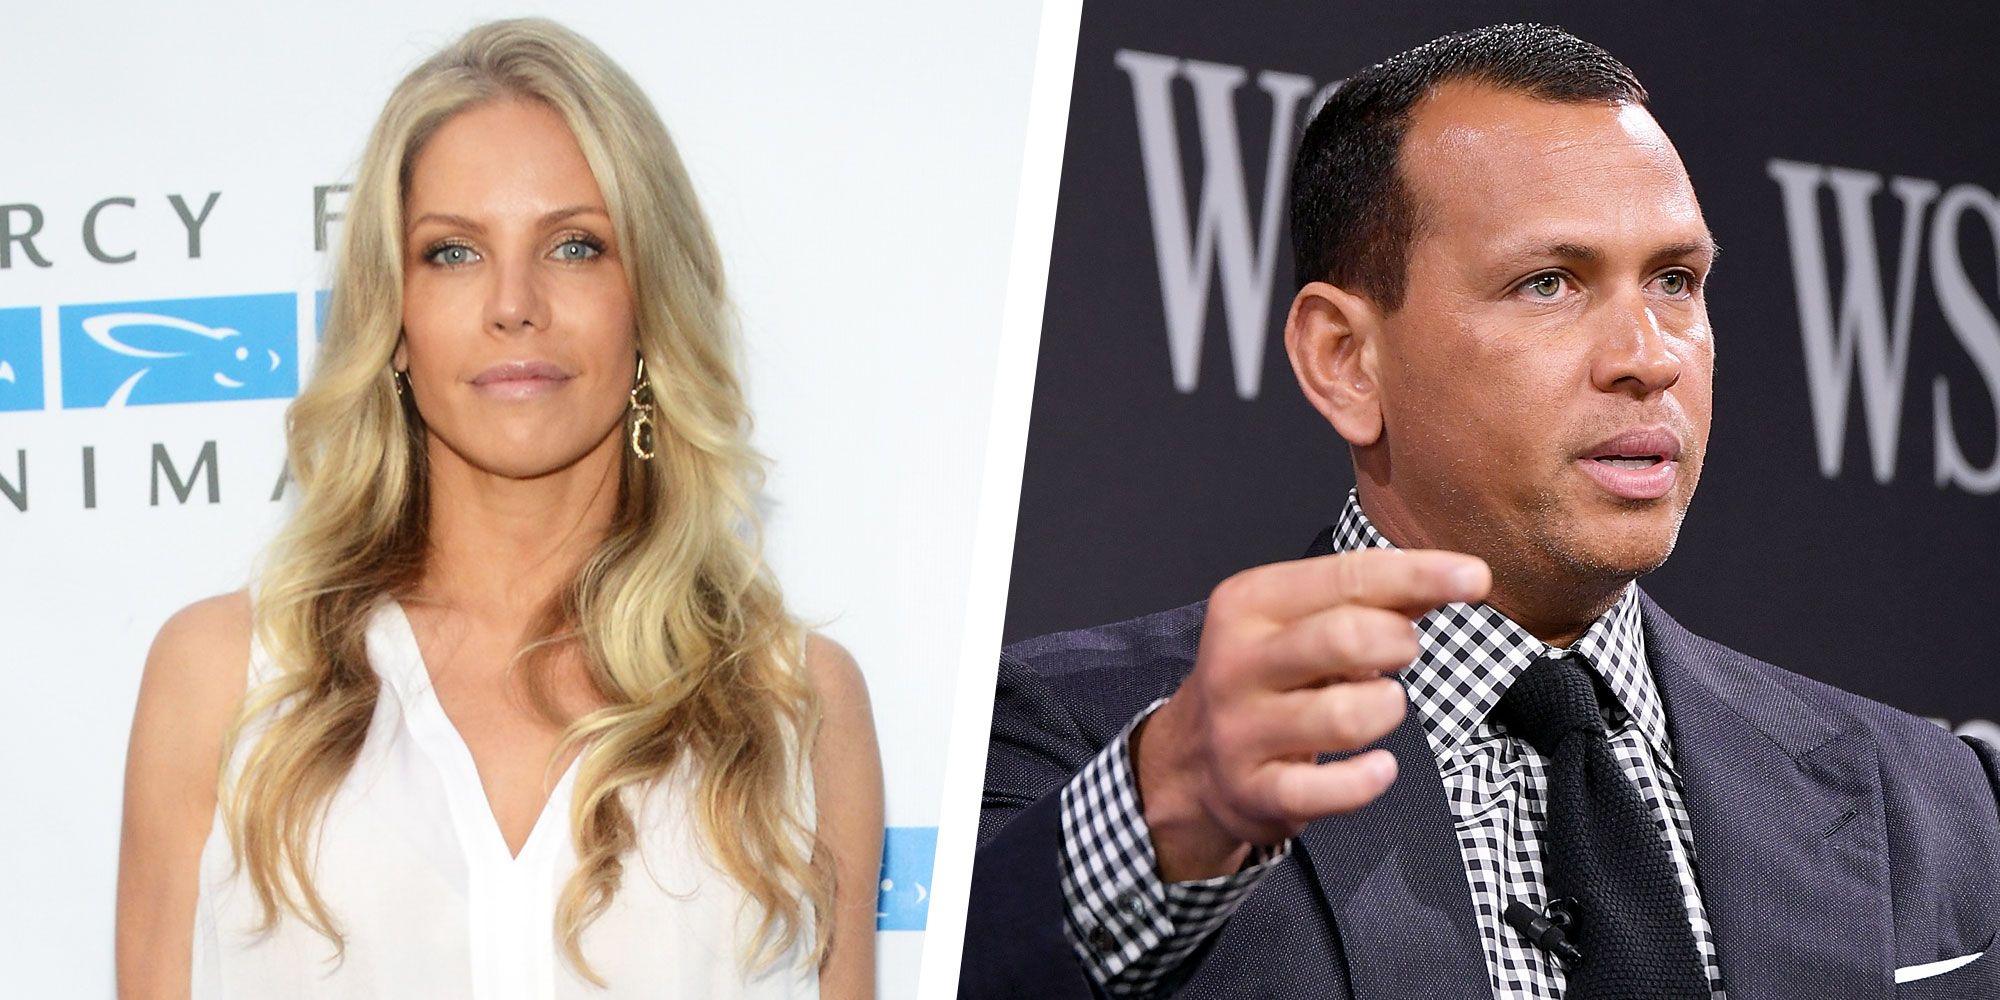 Jose Cansecos Ex-Wife Jessica Denies A-Rod Affair on Twitter hq nude picture